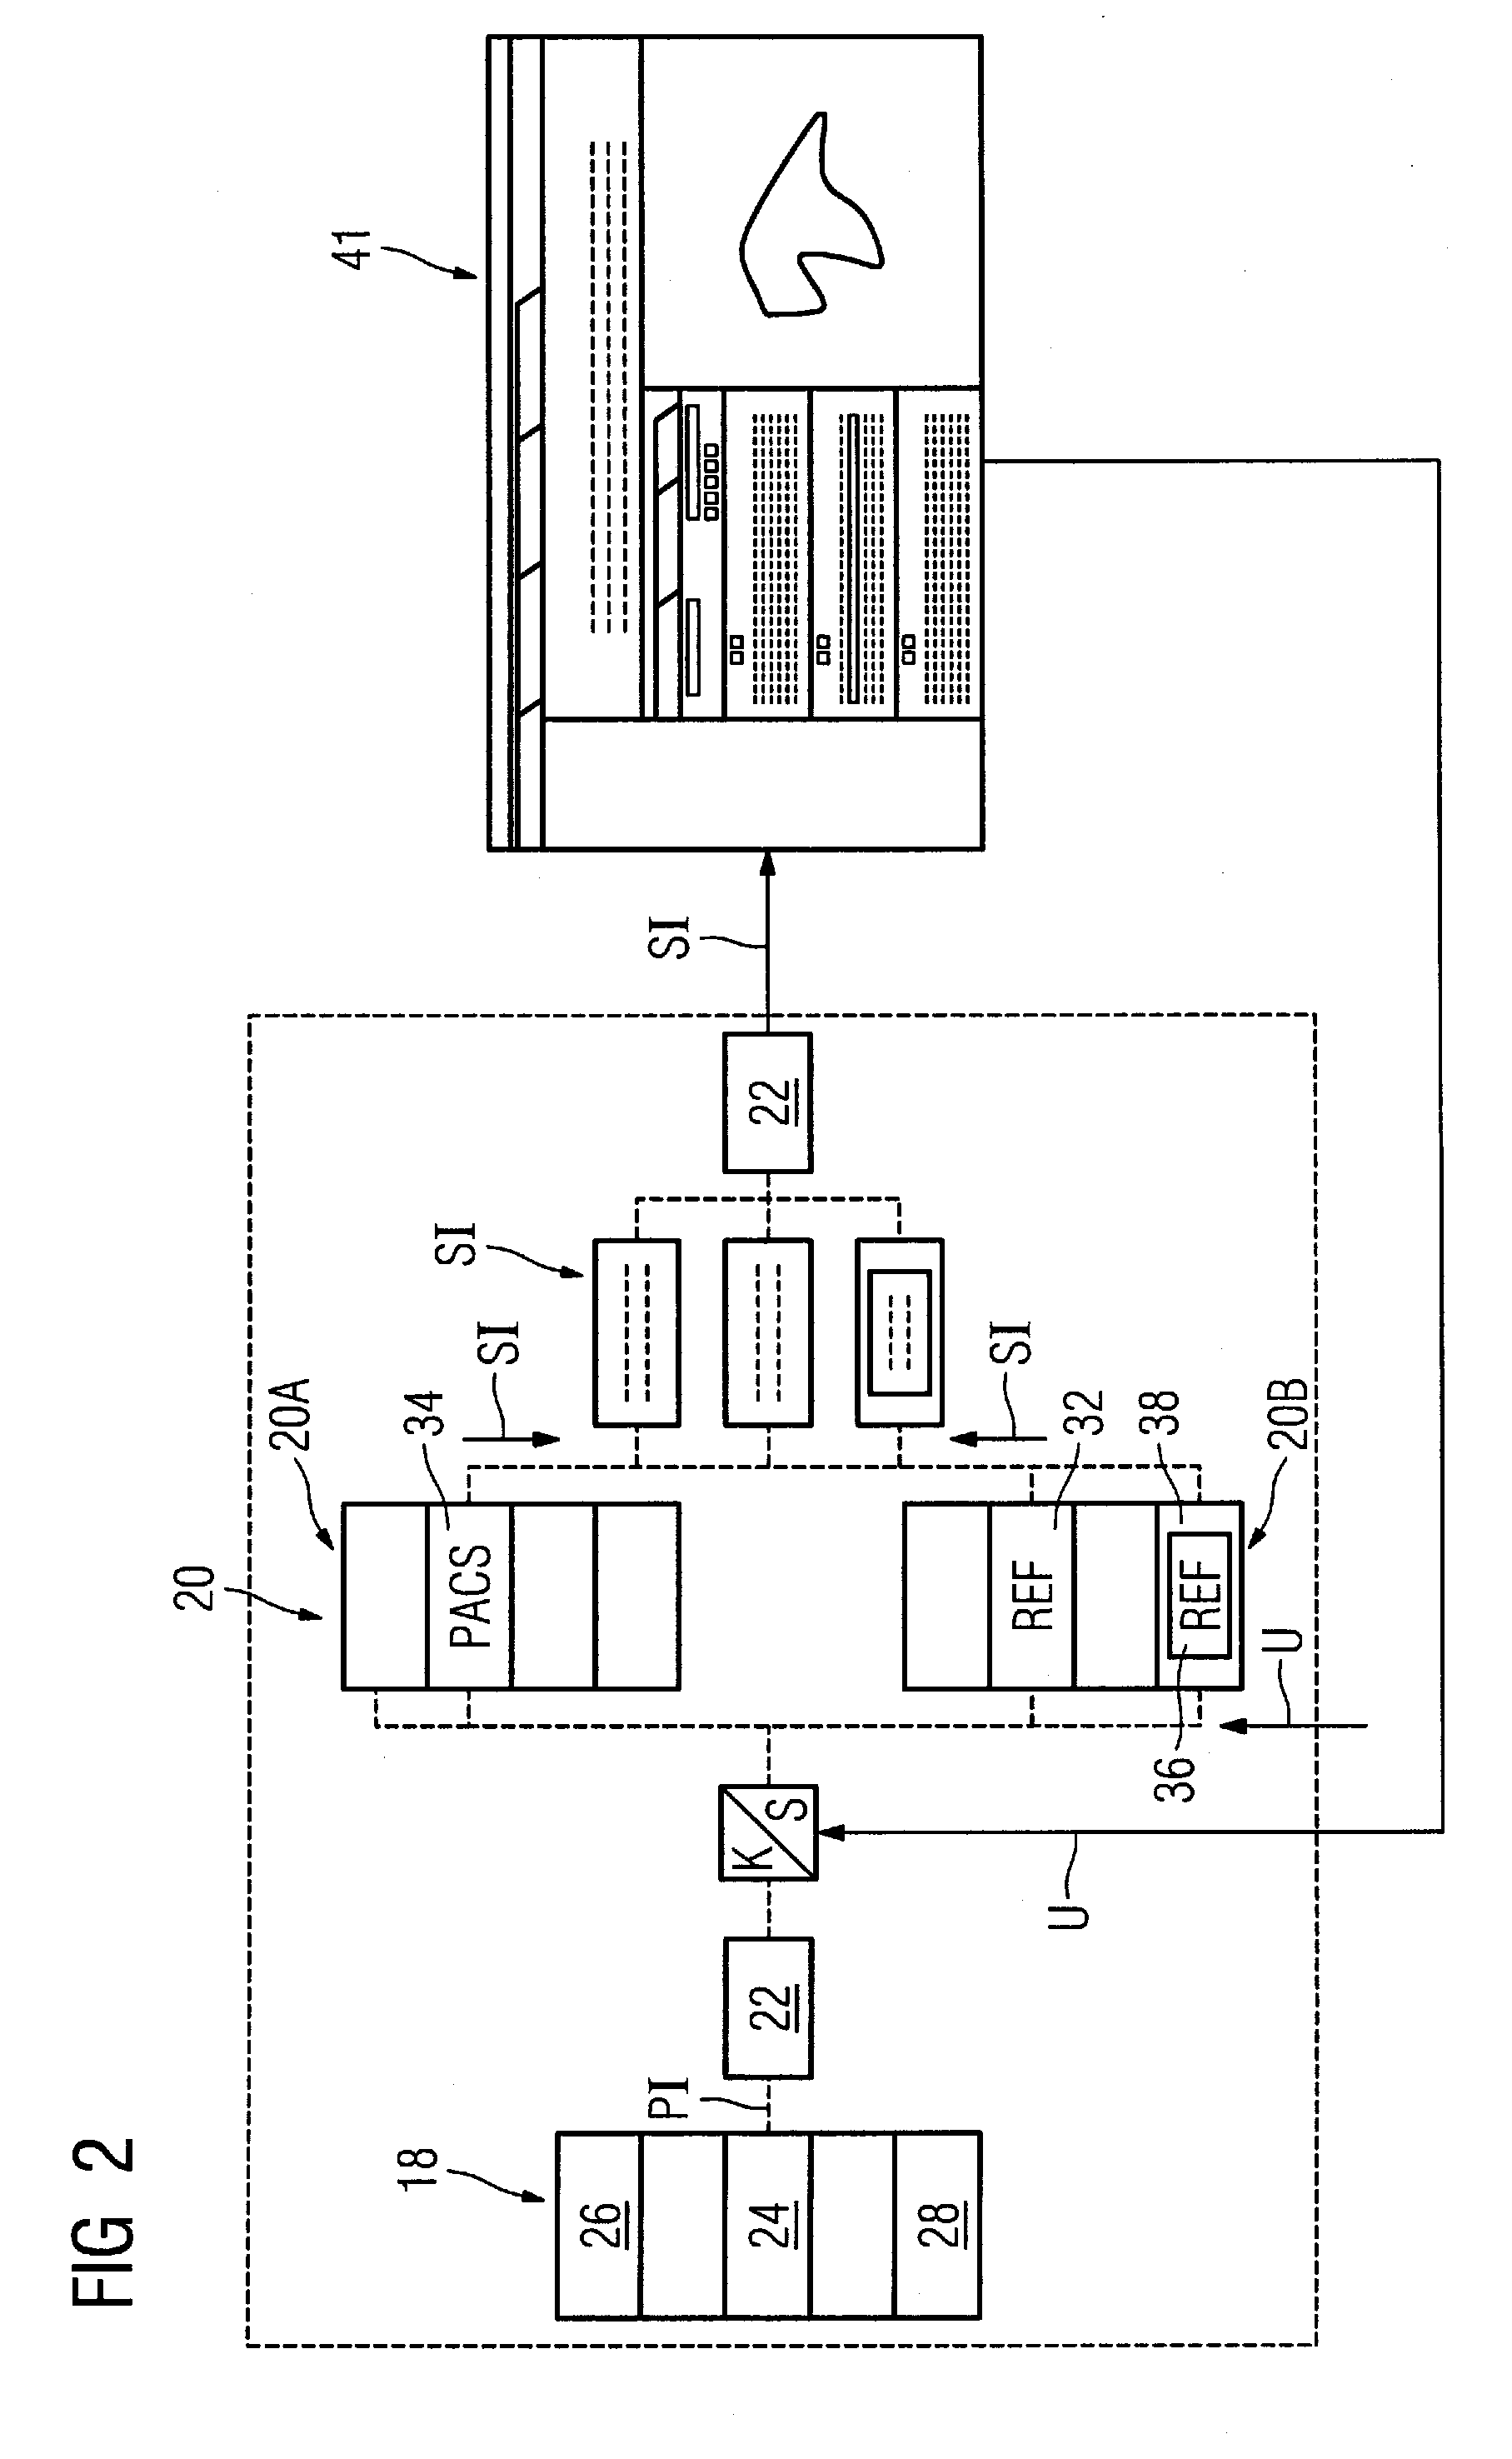 Method and data processing system to assist a medical diagnosis